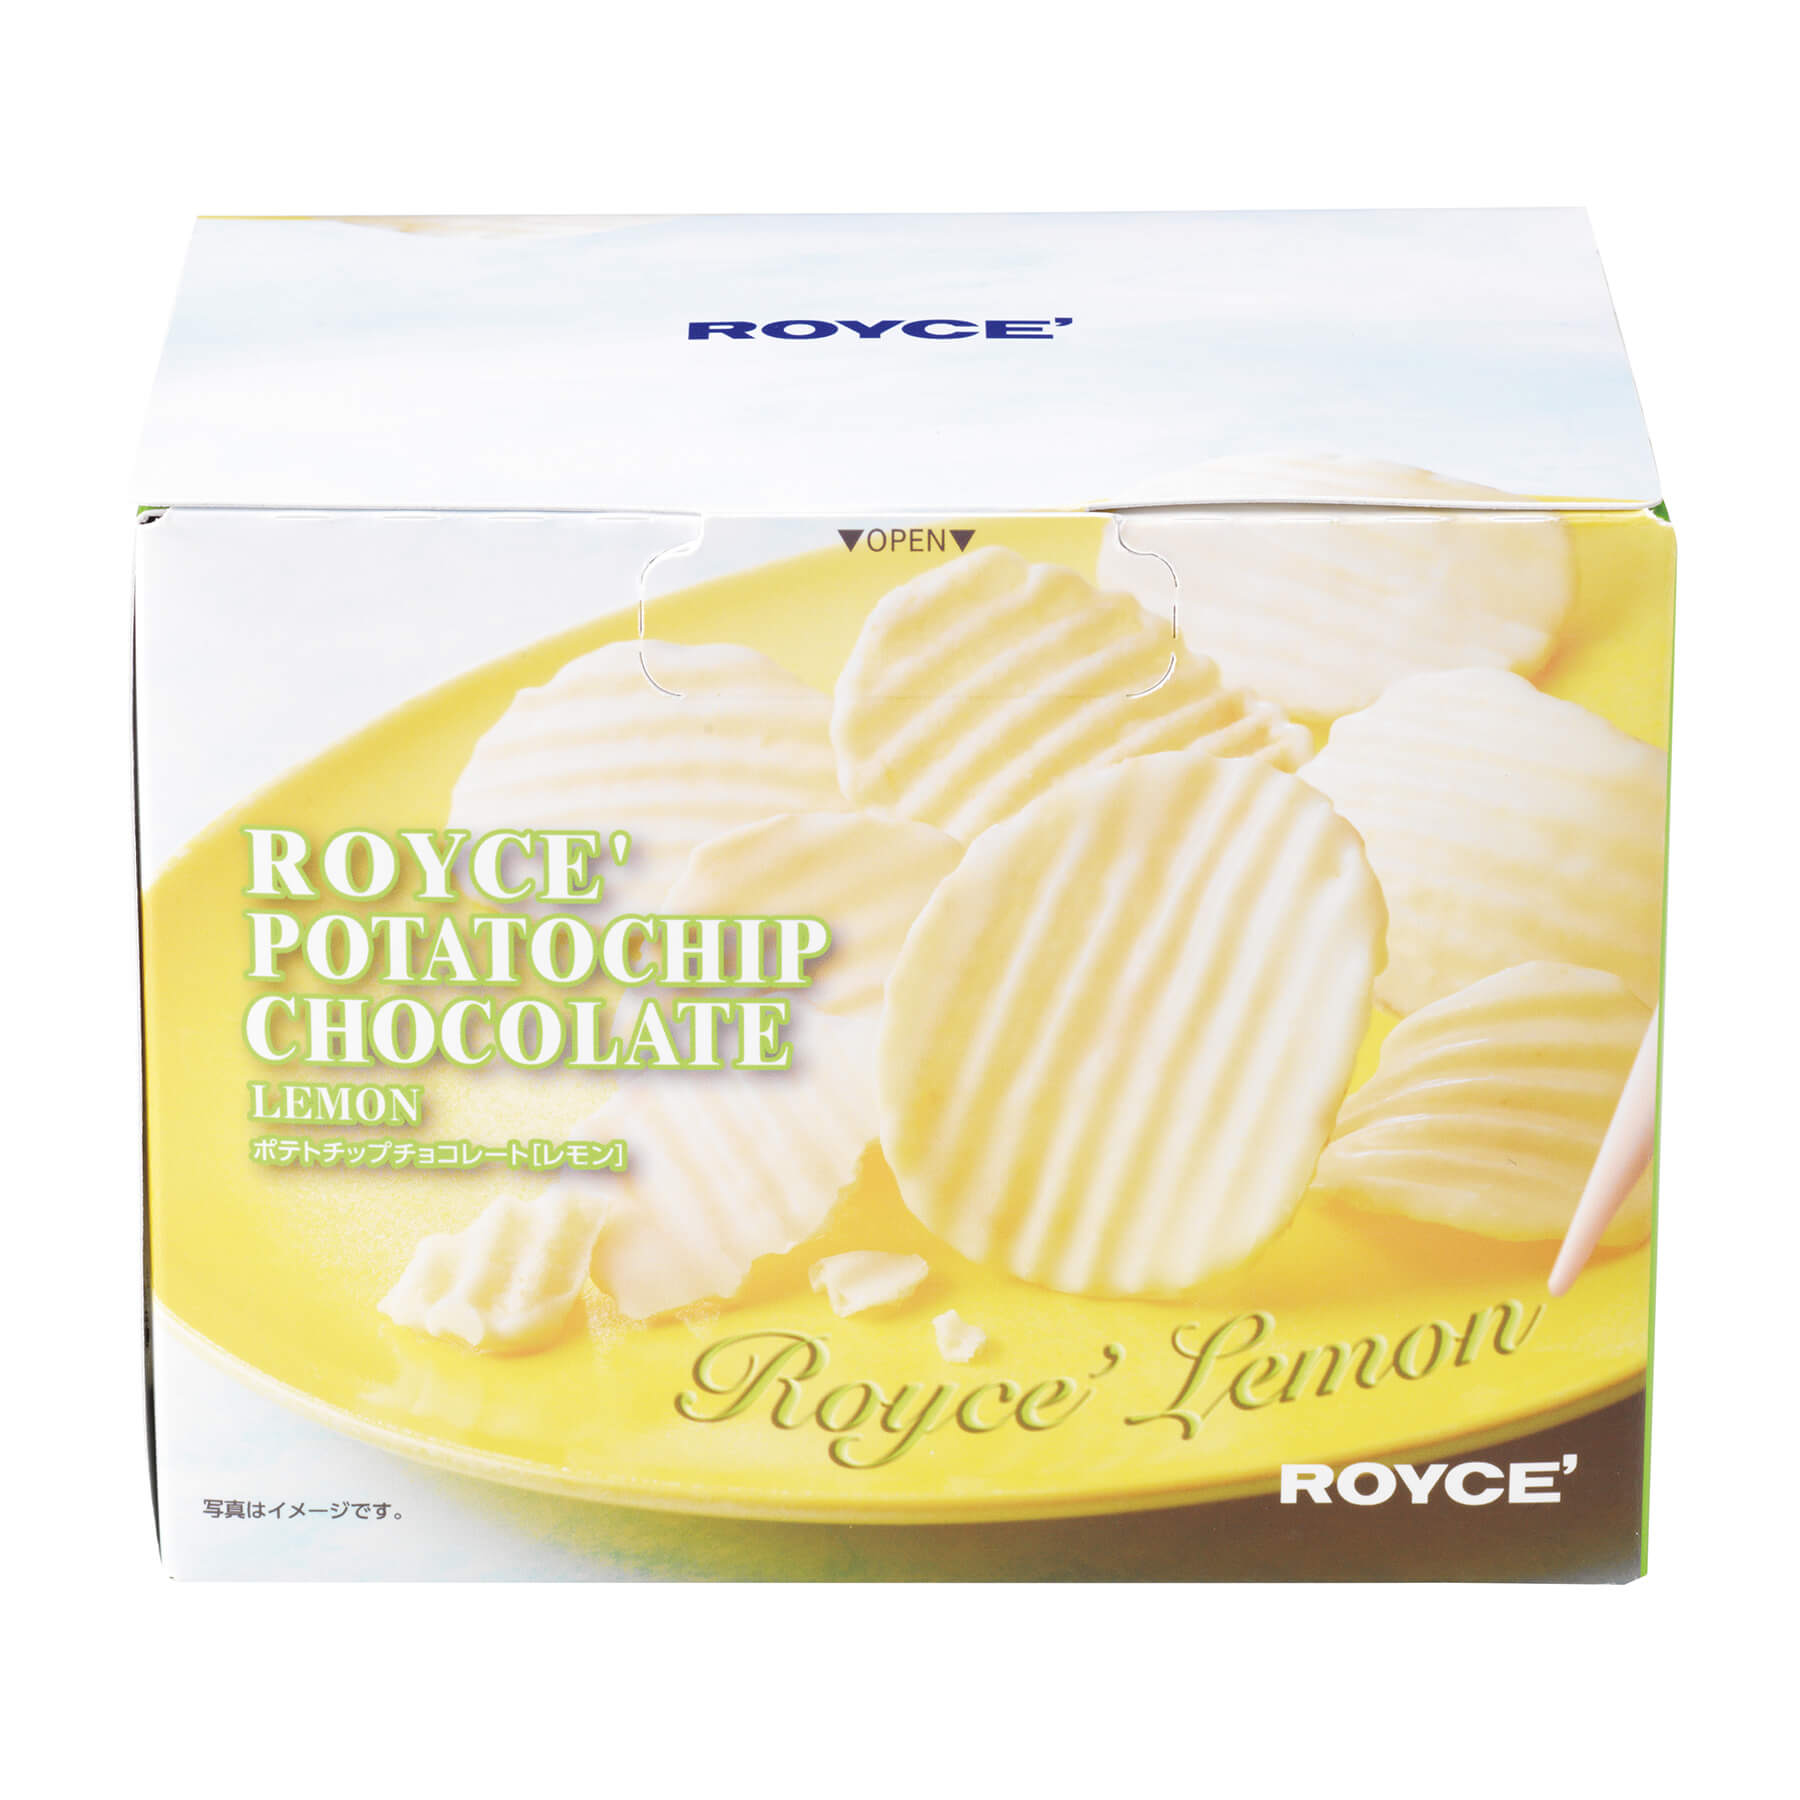 ROYCE' Chocolate - Potatochip Chocolate "Lemon" - Image shows a box in yellow and white with a picture of potato chips on a yellow plate. Text says (from top) ROYCE'. ROYCE' Potatochip Chocolate Lemon. ROYCE' Lemon. ROYCE'. Background is in white.